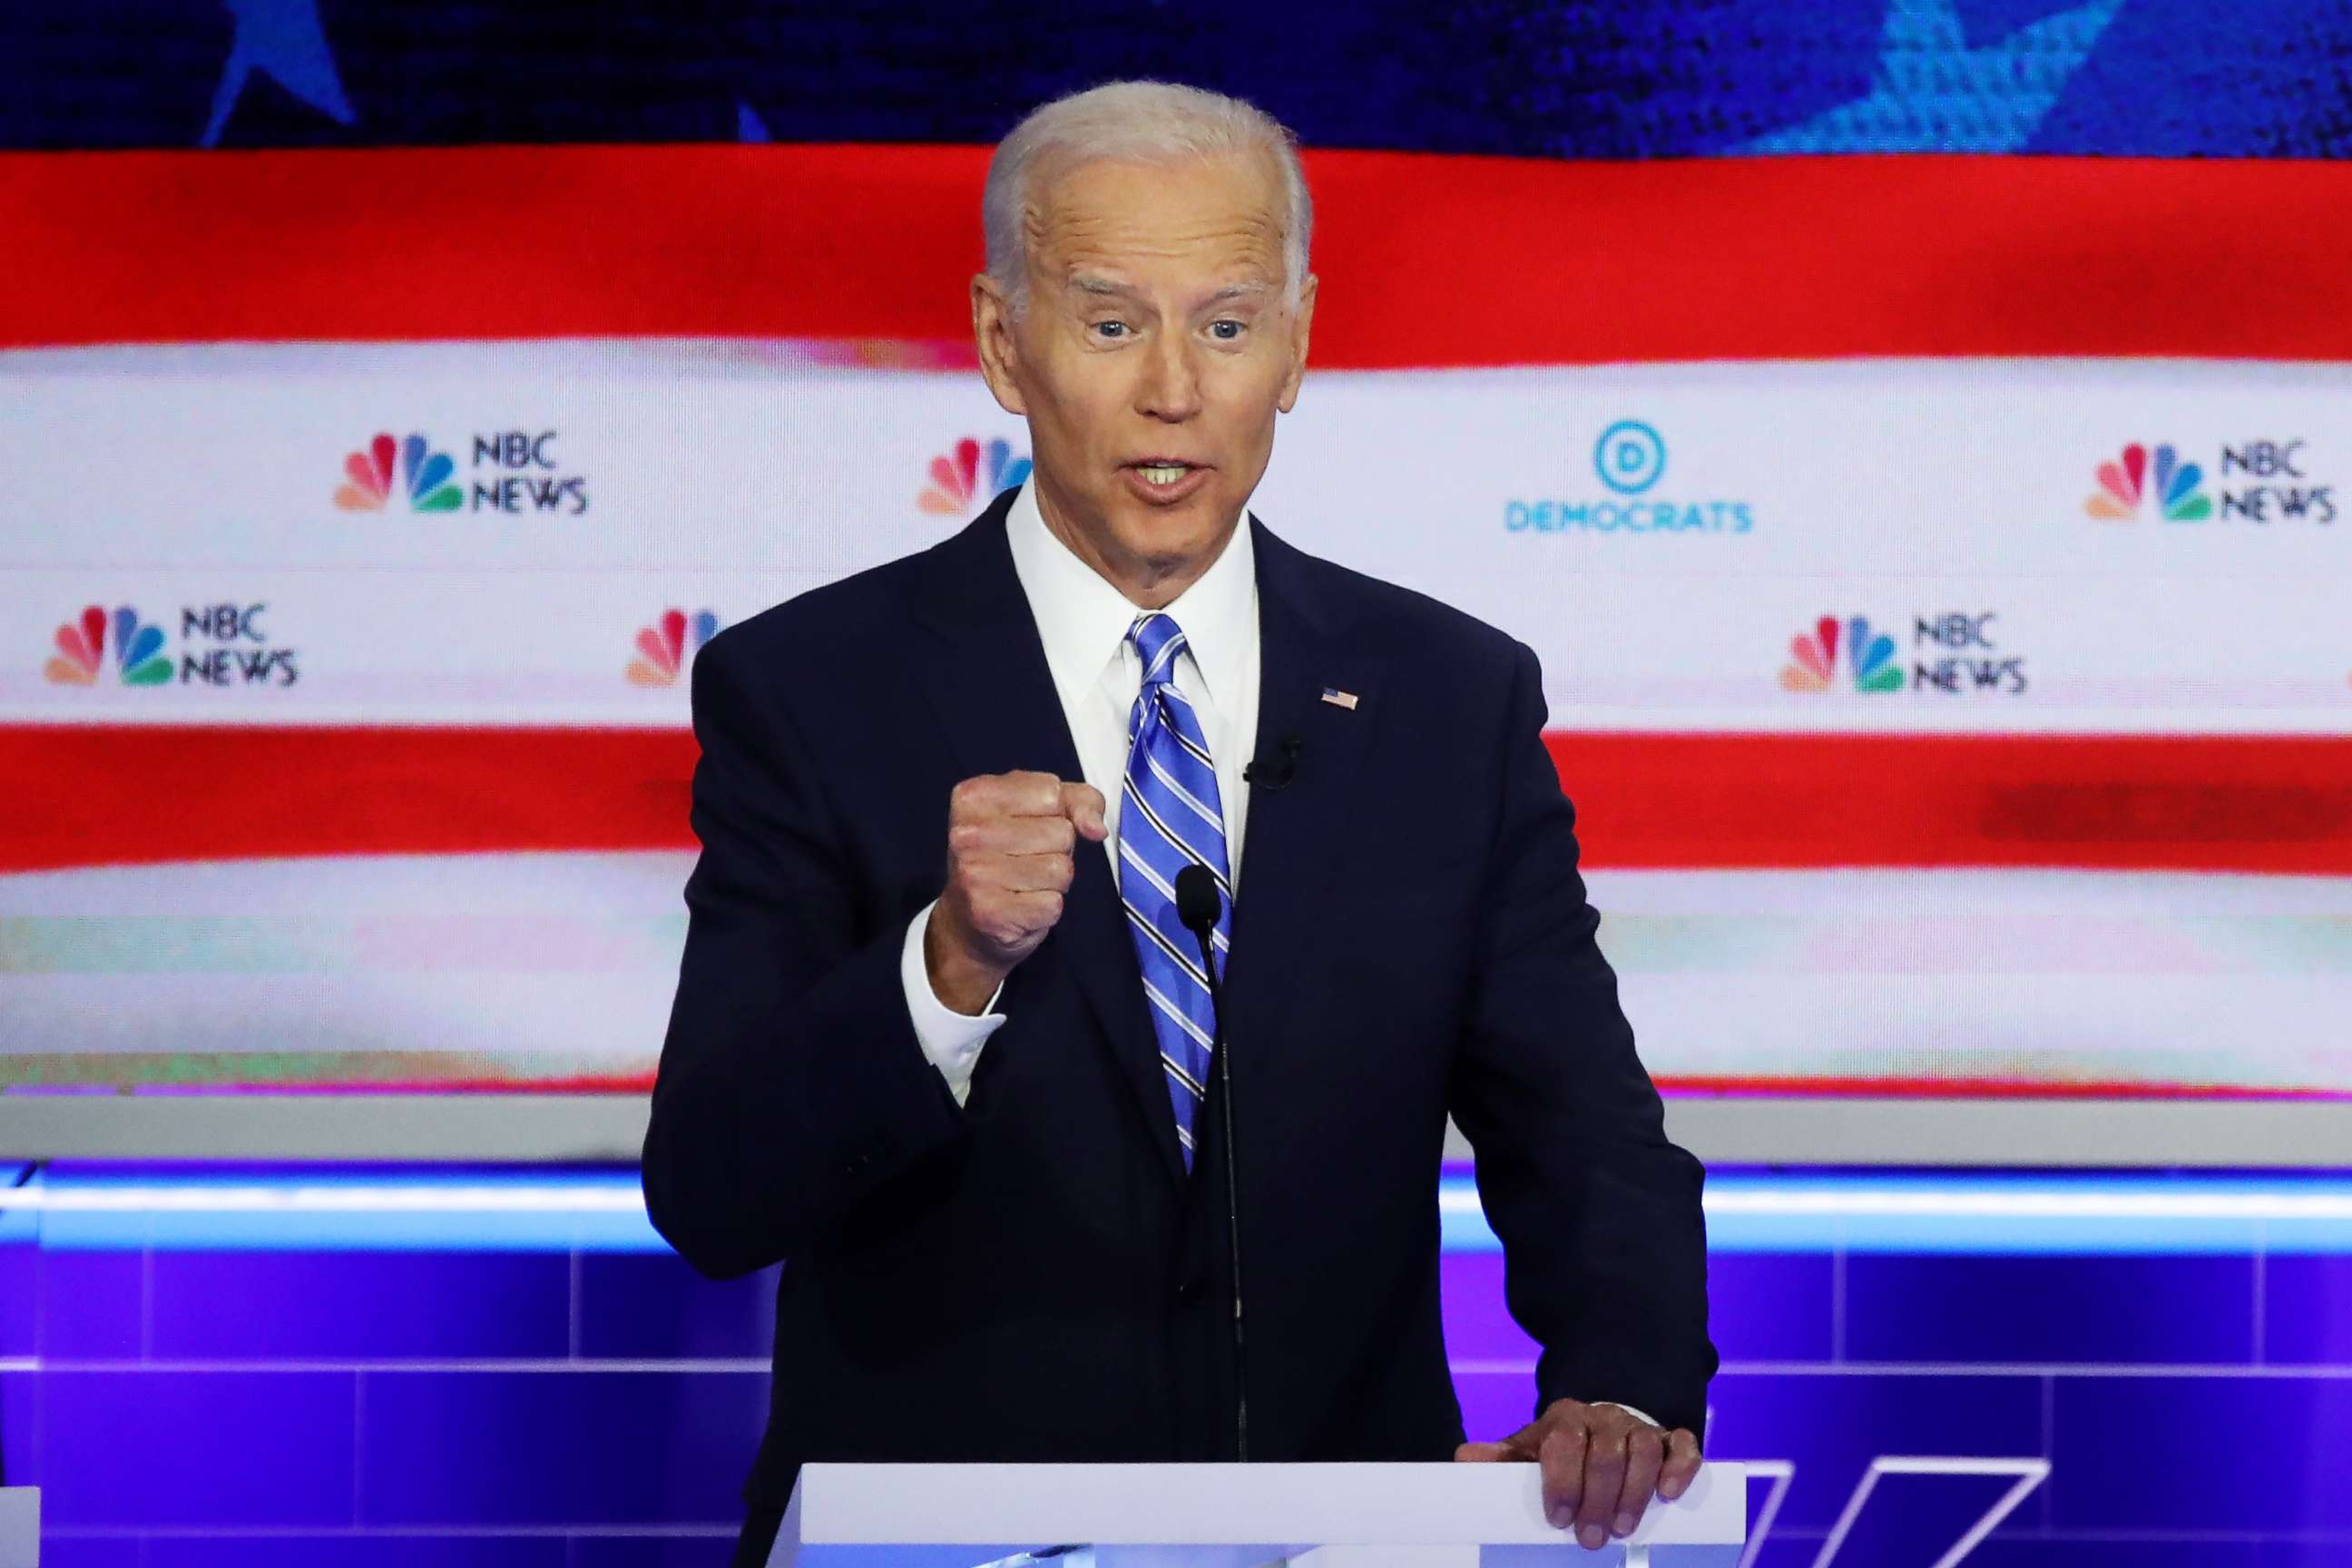 PHOTO: Joe Biden participates in the second night of the first 2020 democratic presidential debate at the Adrienne Arsht Center for the Performing Arts in Miami, June 27, 2019.